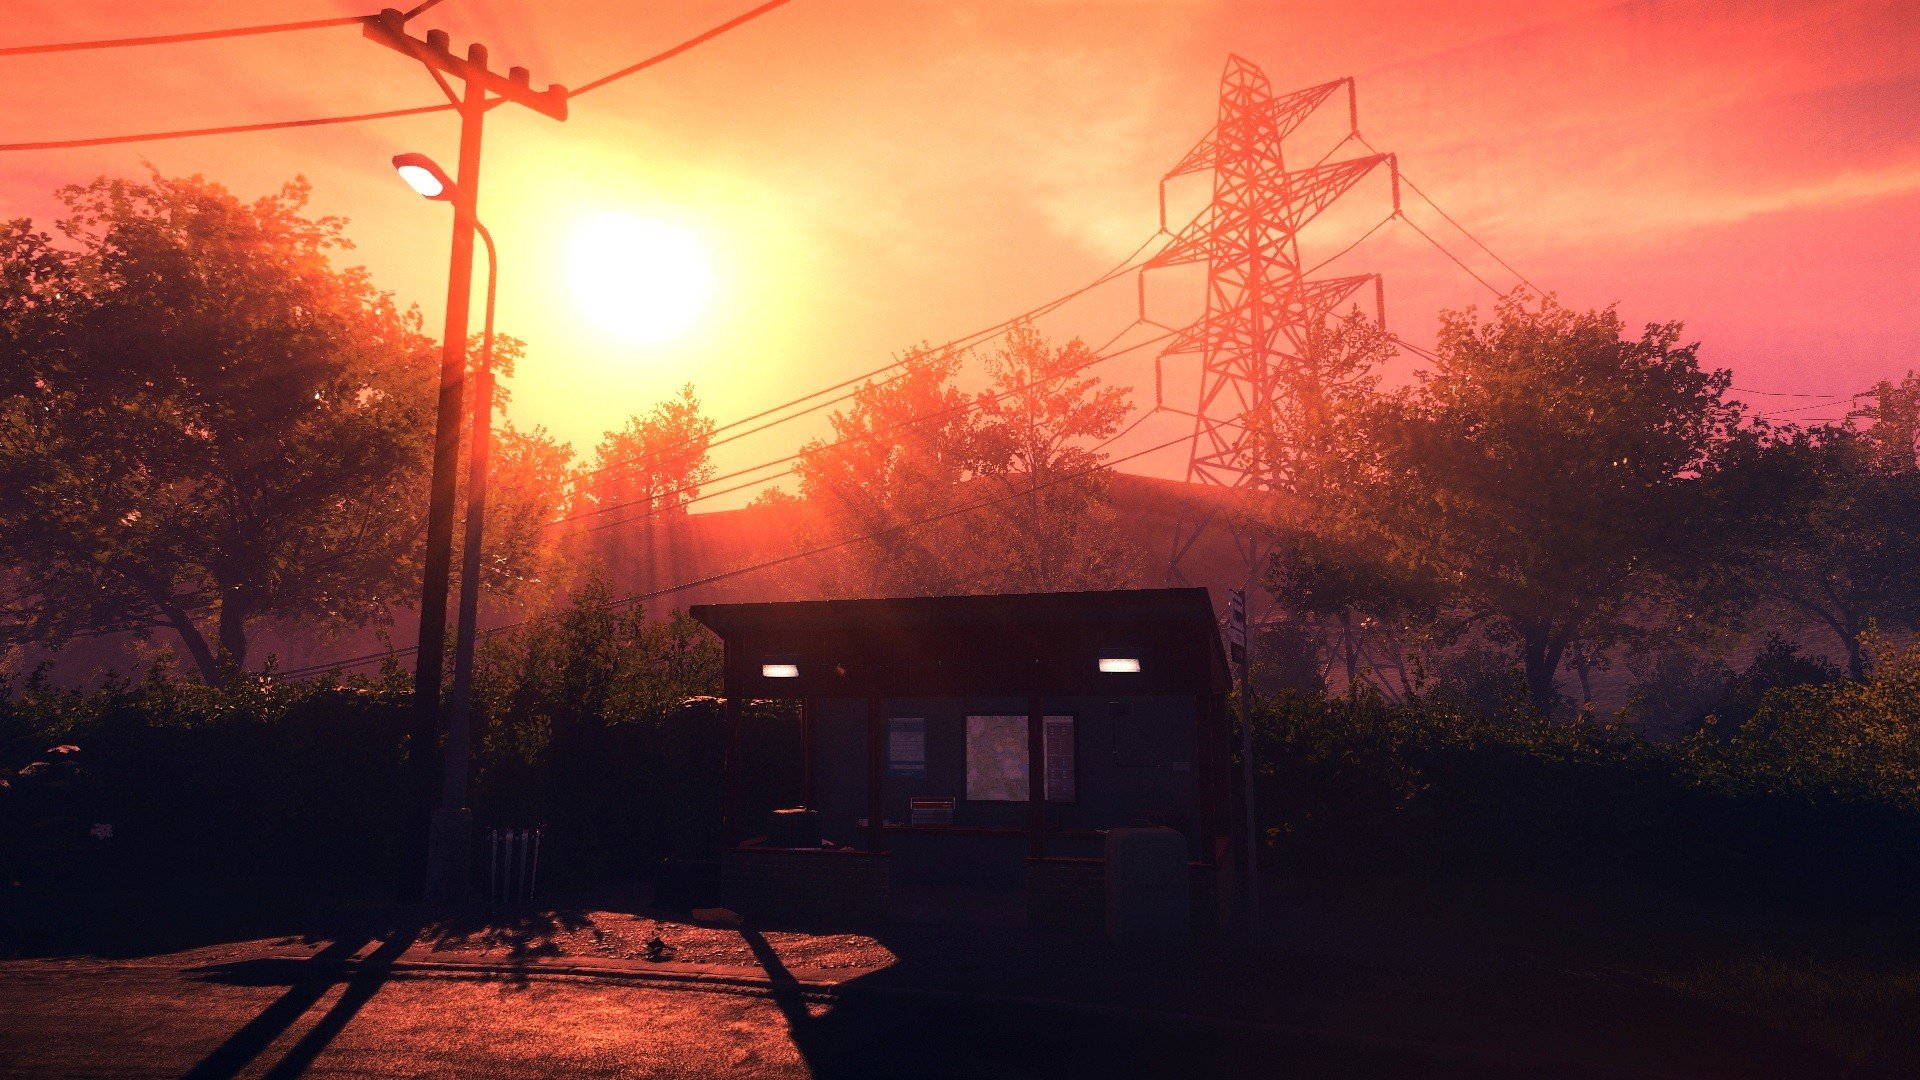 download everybody gone to the rapture for free